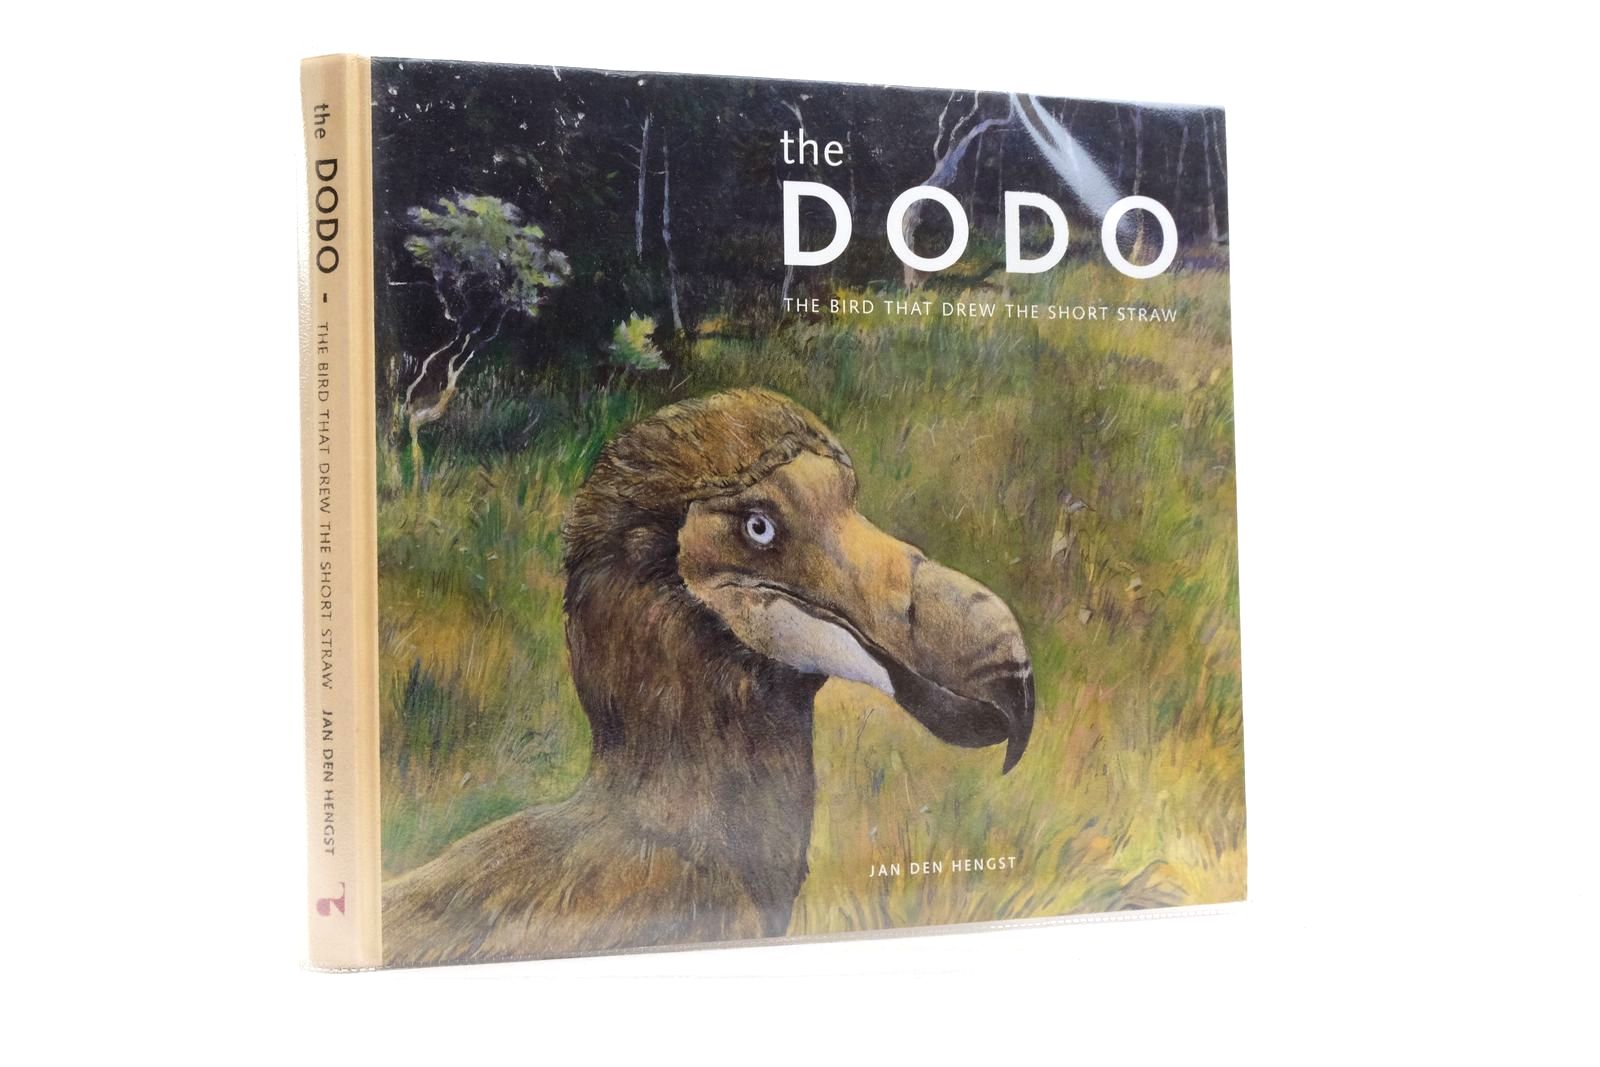 Photo of THE DODO: THE BIRD THAT DREW THE SHORT STRAW written by Den Hengst, Jan published by Art Revisited (STOCK CODE: 2137872)  for sale by Stella & Rose's Books